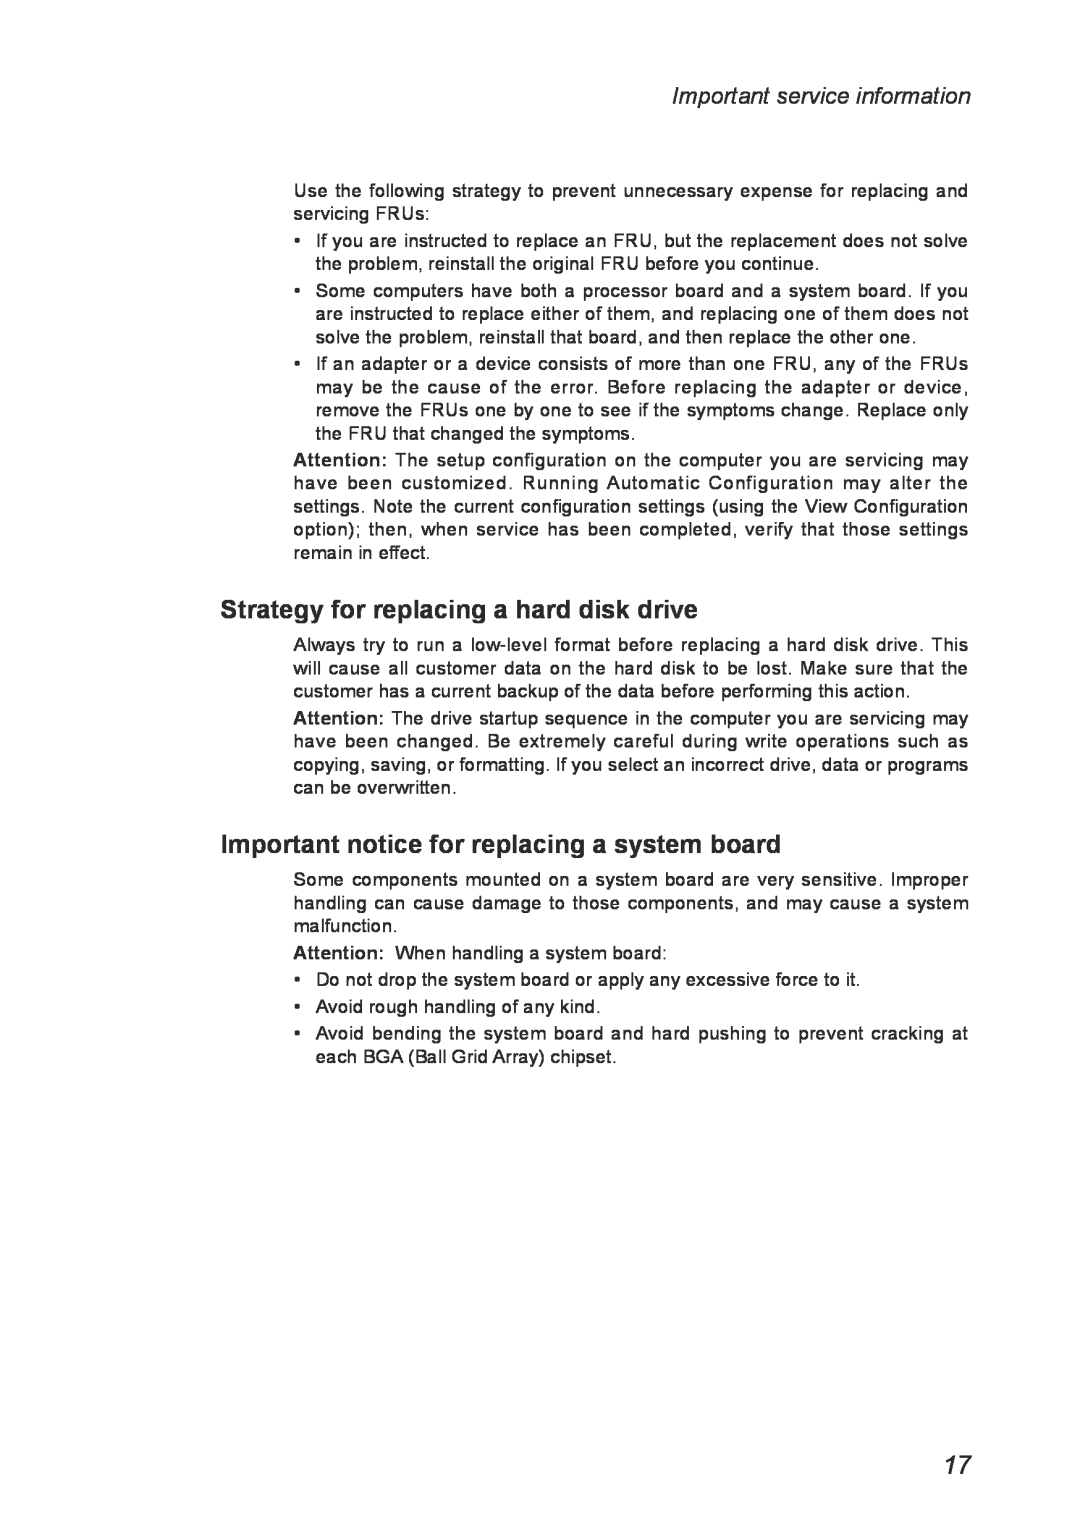 Lenovo G560 manual Strategy for replacing a hard disk drive, Important notice for replacing a system board 